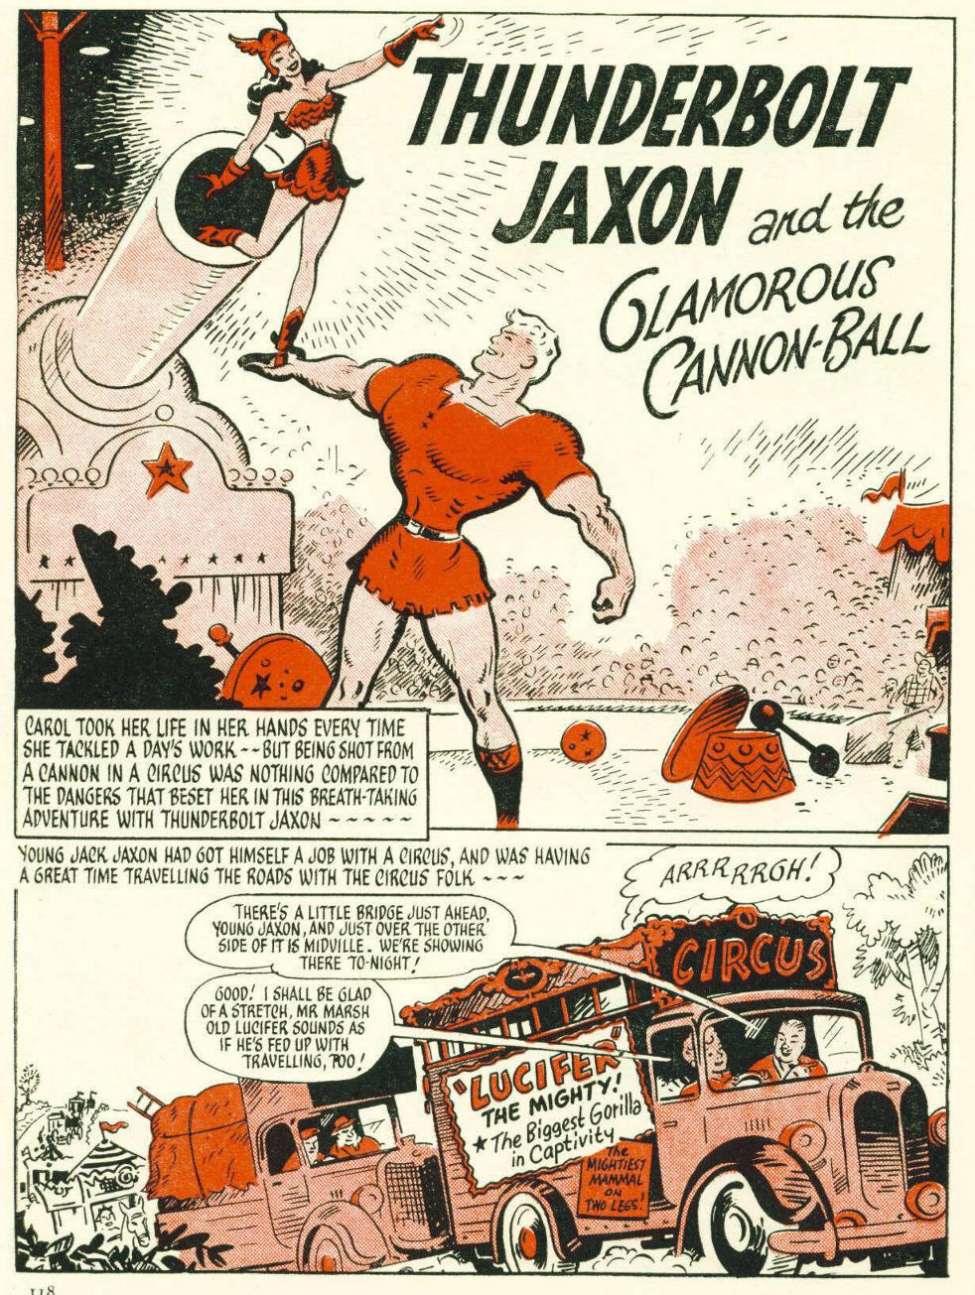 Book Cover For Thunderbolt Jaxon and the Glamorous Cannon-Ball